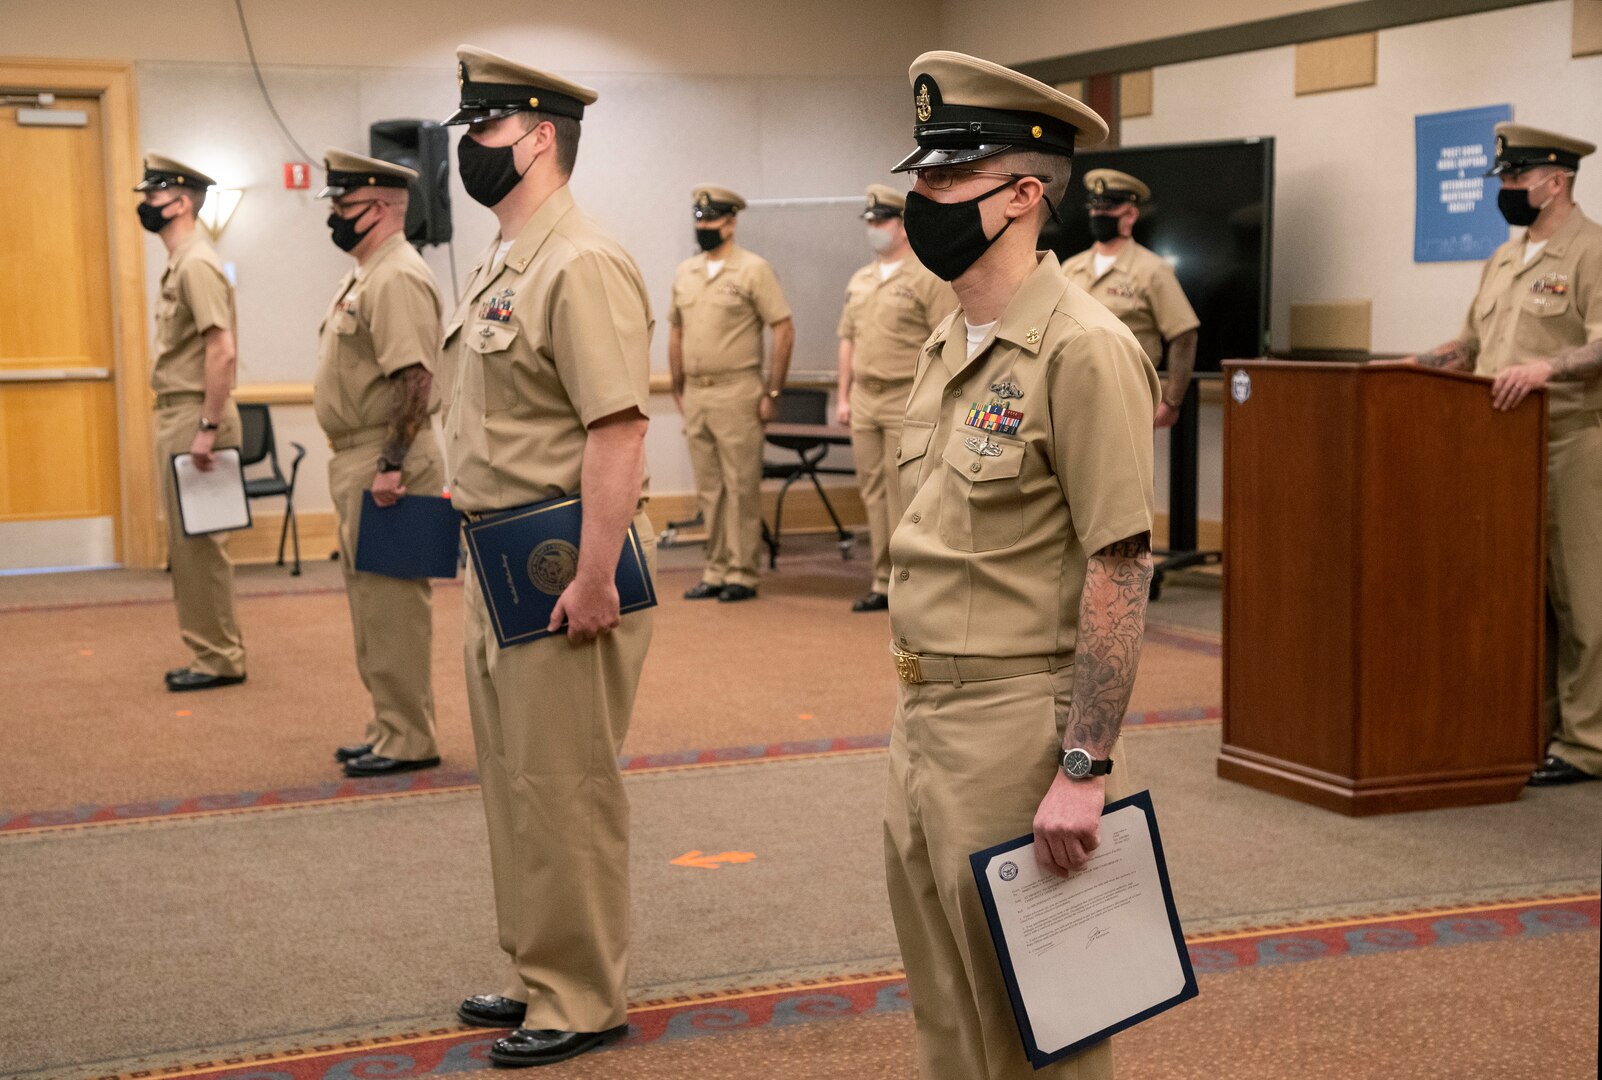 Chief Petty Officer selects Matthew Bernstein, Devin Donohue, Austin Rhodes and Mark Robbins, with Puget Sound Naval Shipyard & Intermediate Maintenance Facility, were pinned to the rank of chief petty officer during a ceremony Jan. 29, 2021, at Olympic Lodge on Naval Base Kitsap-Bremerton, Washington. The ceremony had limited attendees, with participants and attendees socially distanced to adhere to COVID-19 protective protocols.